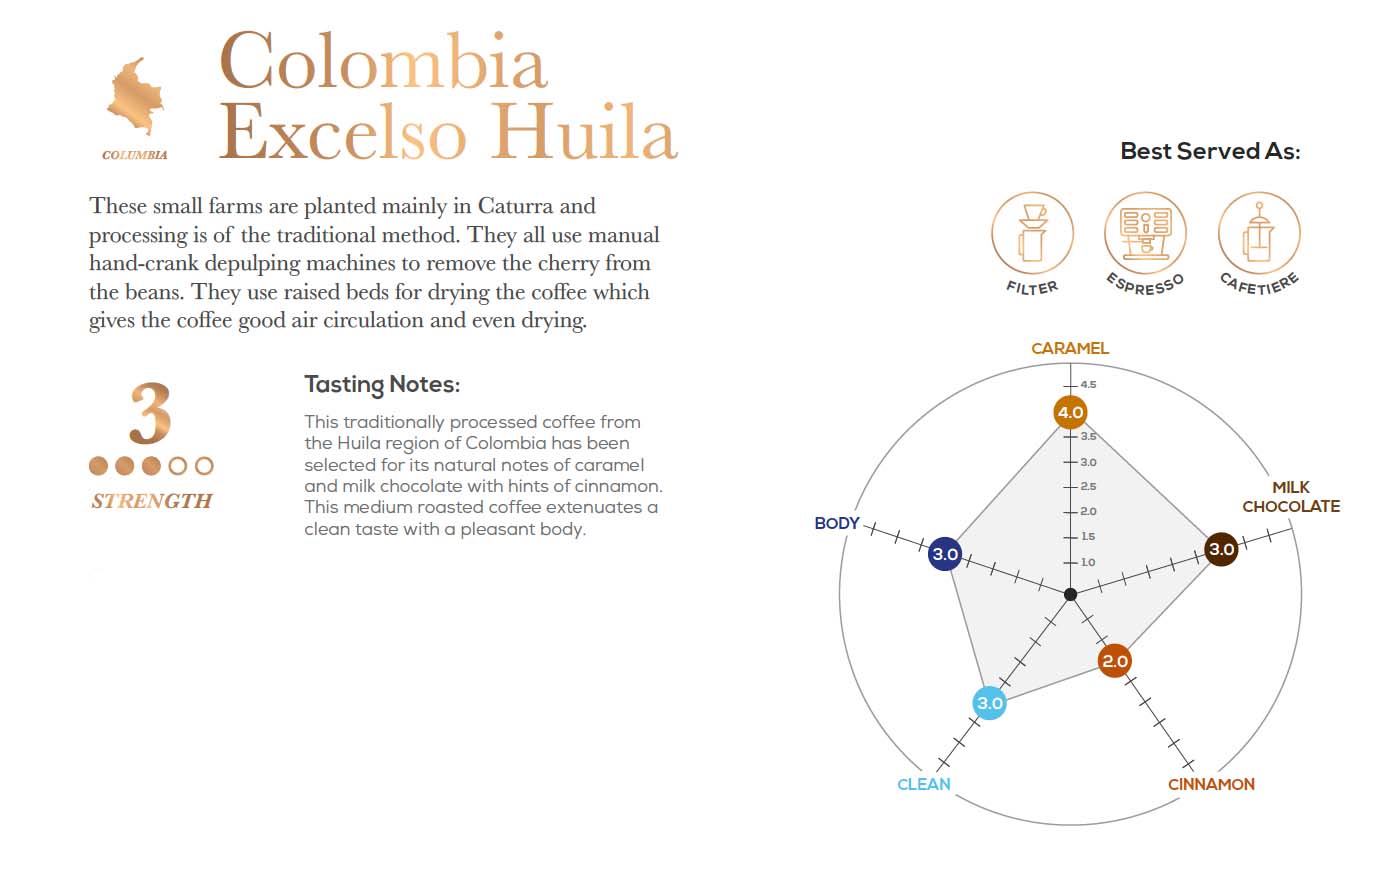 COLOMBIAN EXCELSO HUILA